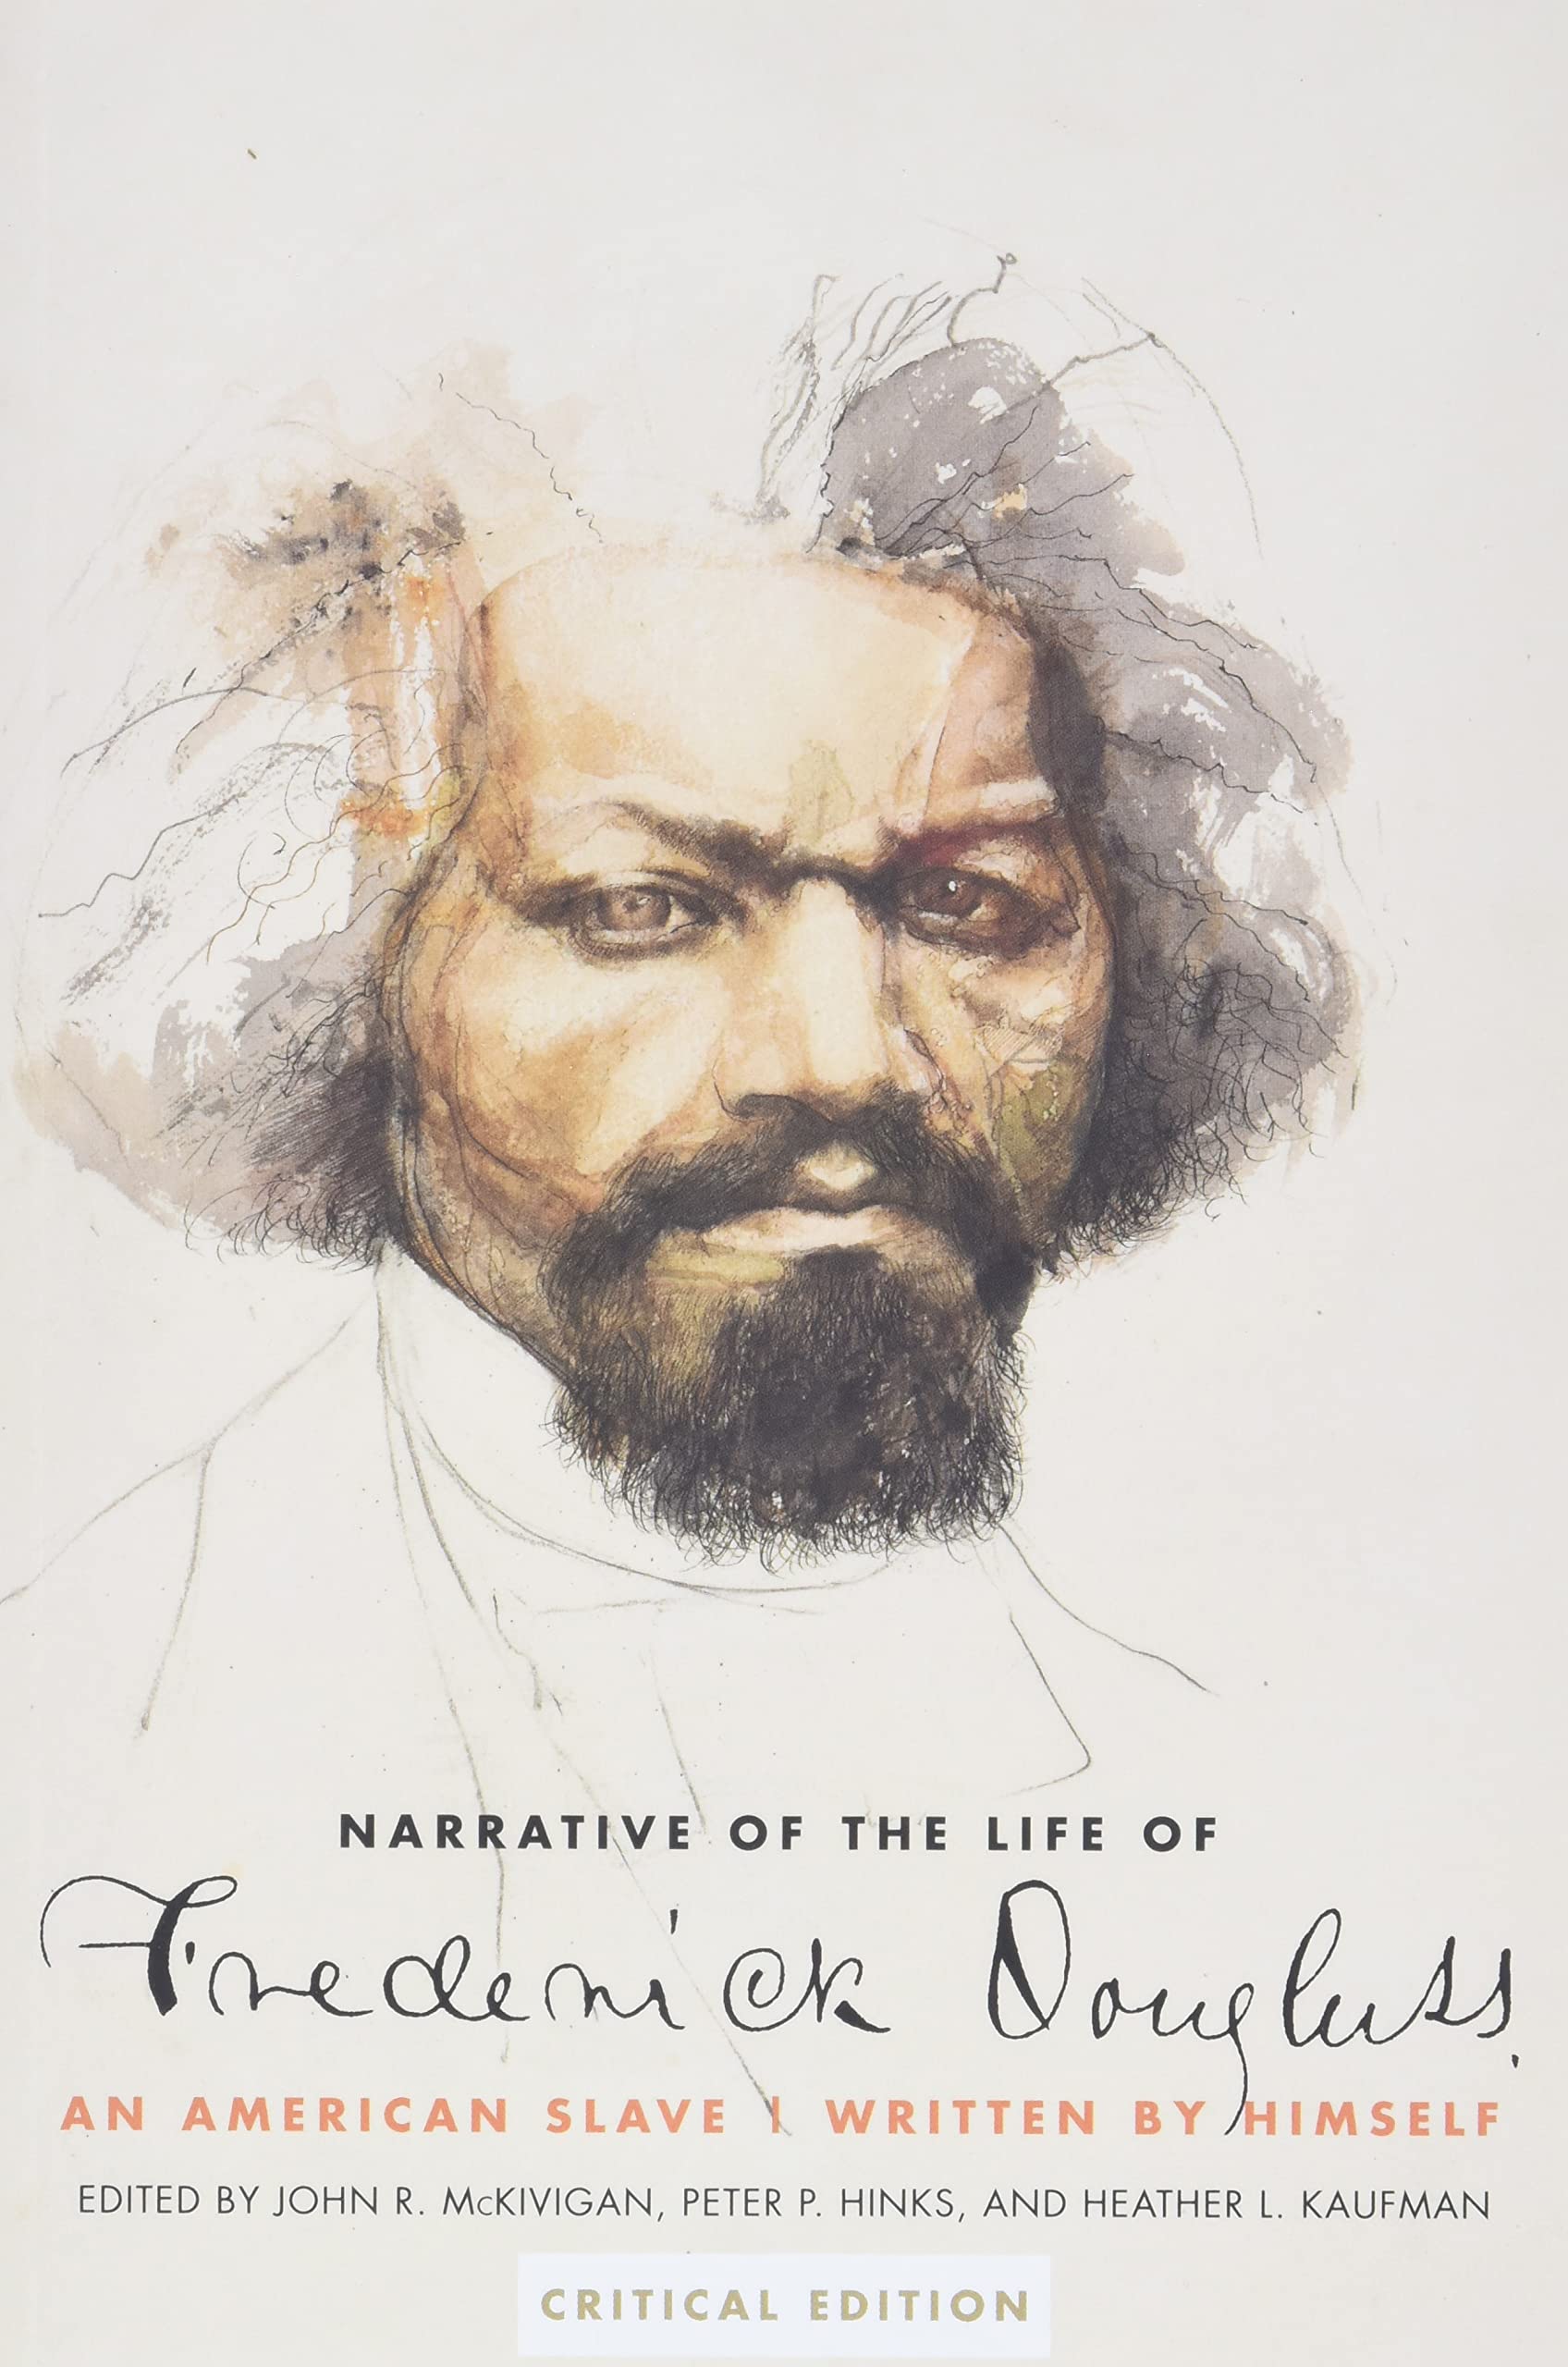 thesis of narrative of frederick douglass